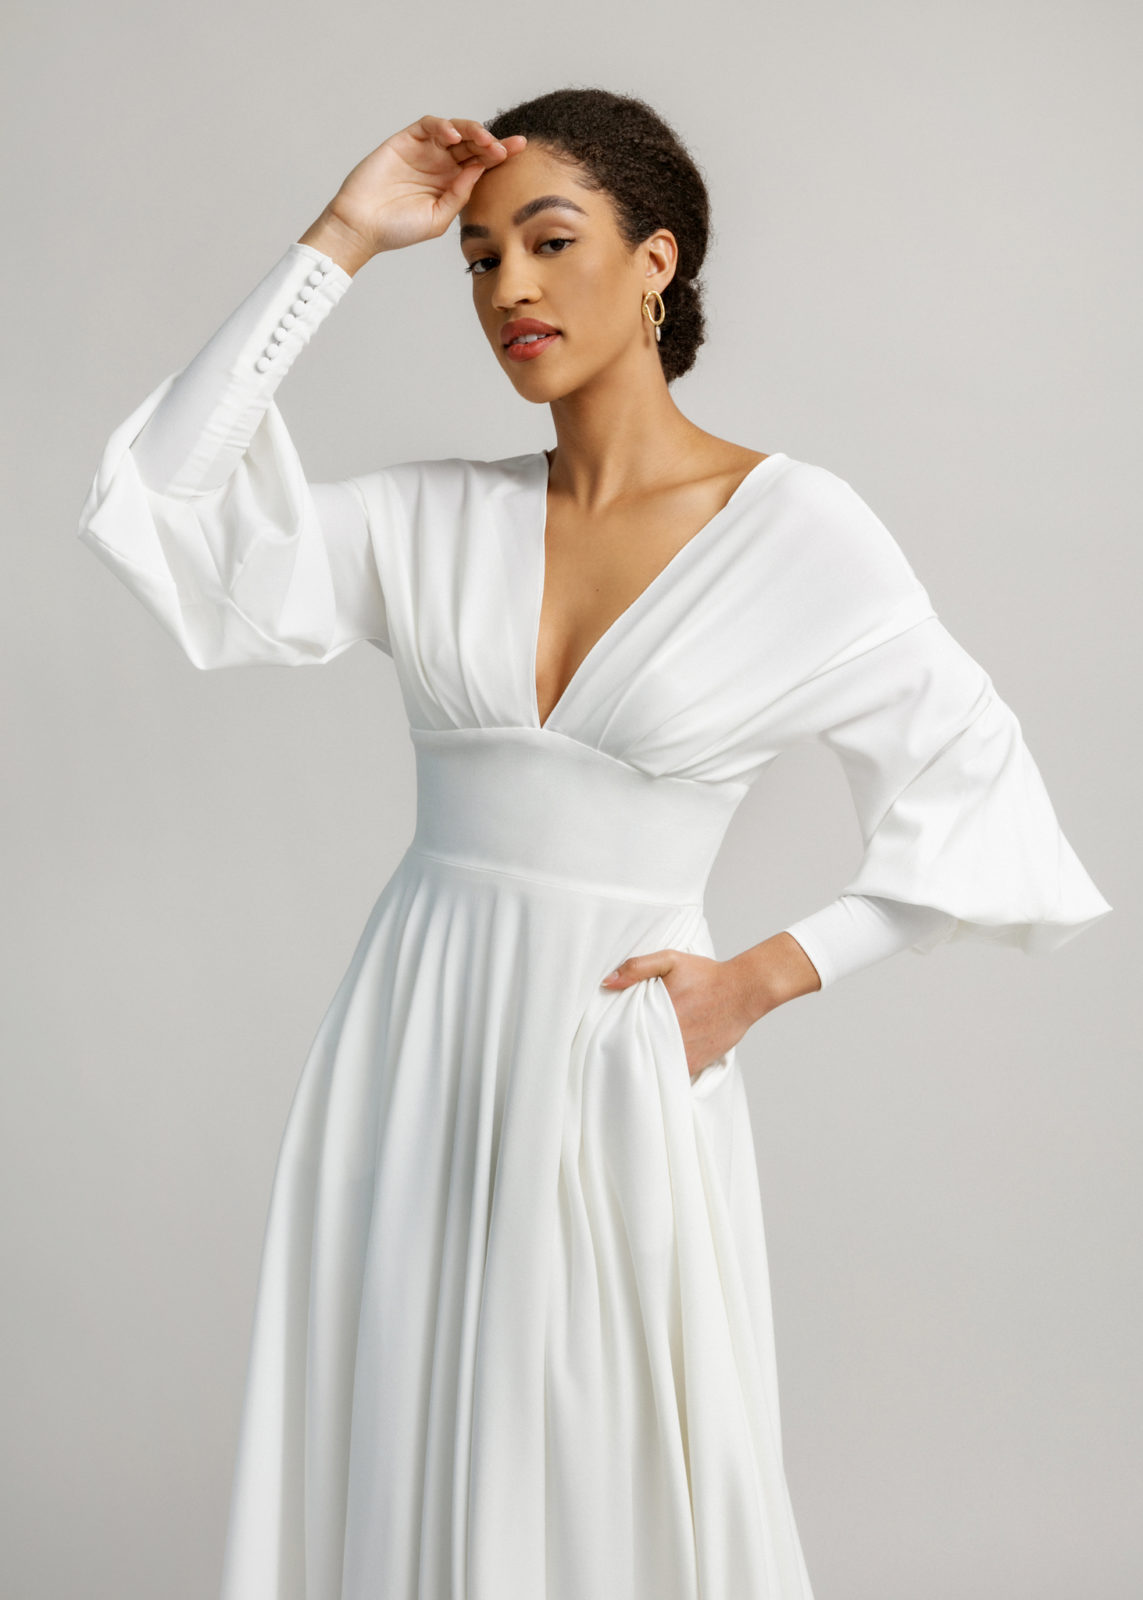 Modern and modest bridal style from Canadian designer Aesling